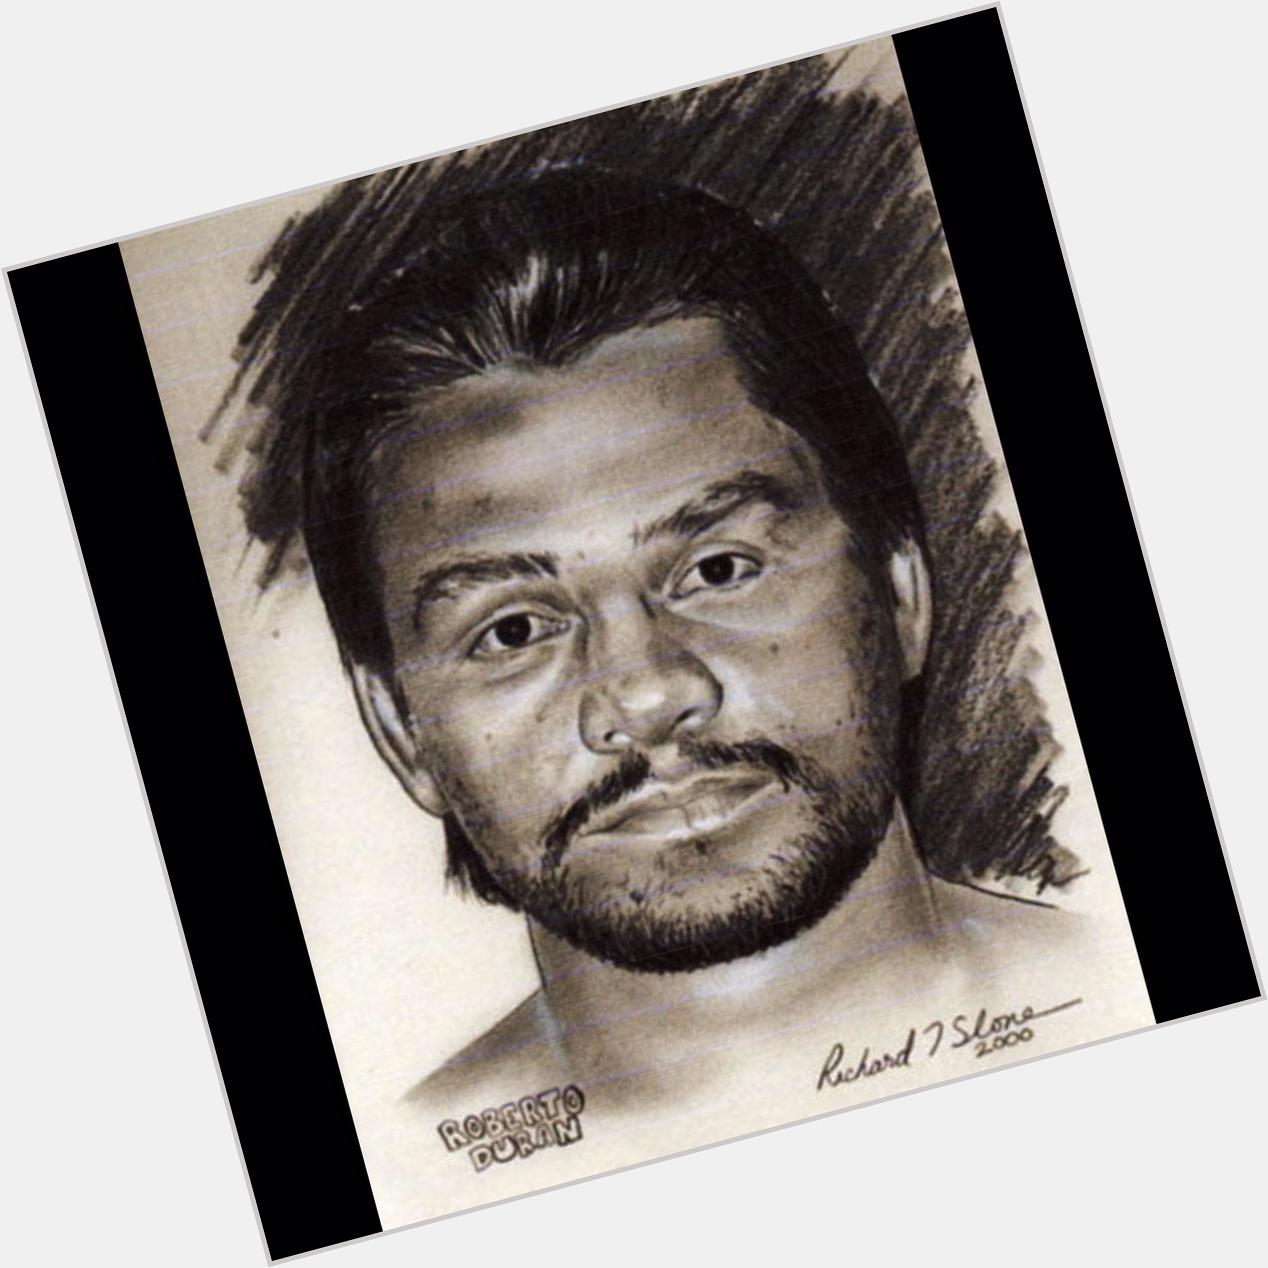 Happy birthday to boxing legend Roberto Duran. An all time great. Throwback charcoal sketch from 15 years ago. 